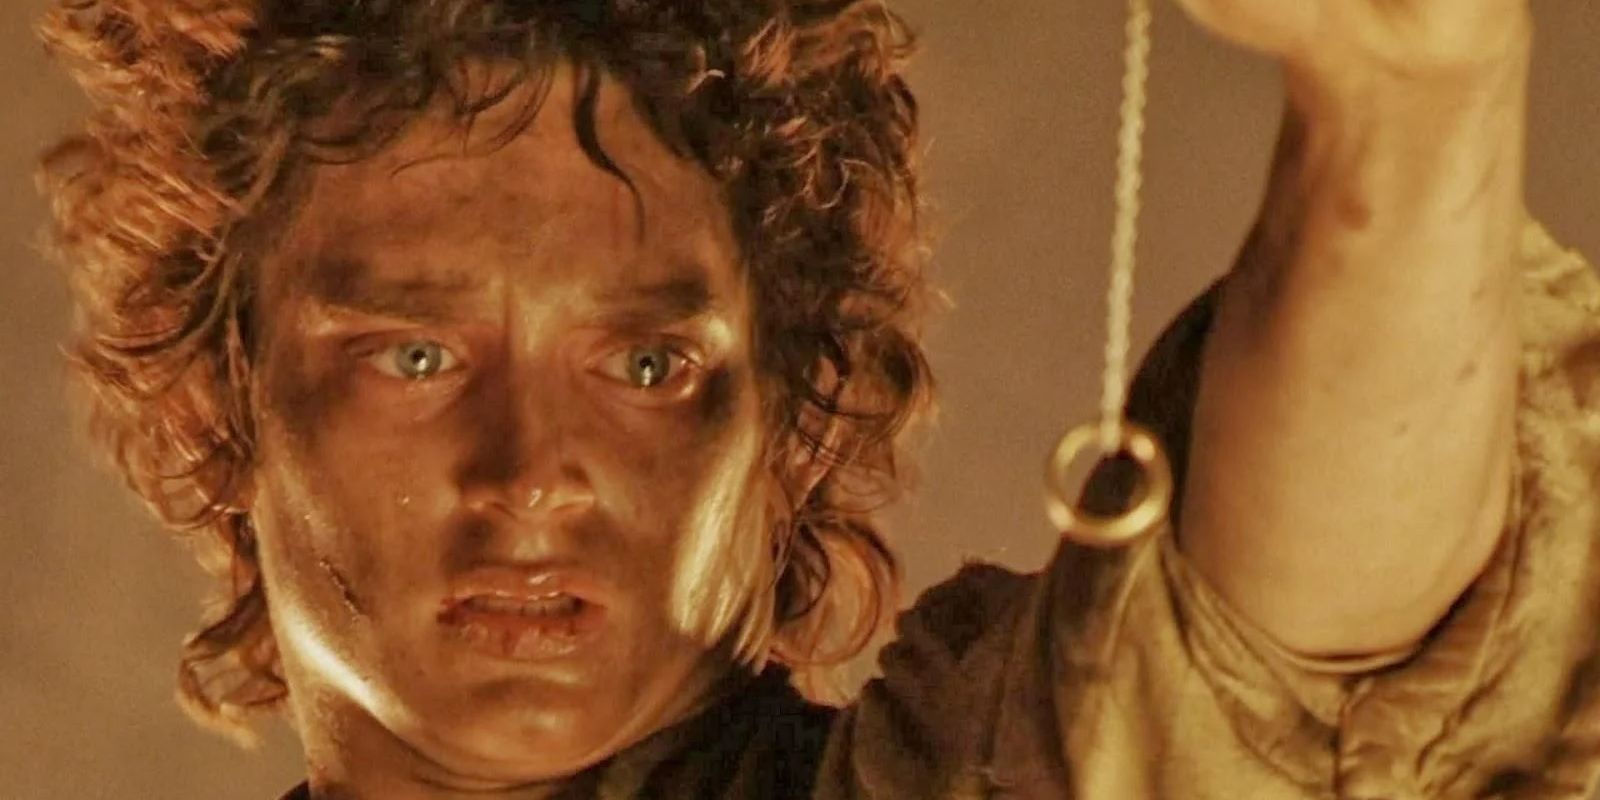 The Lord of the Rings: The Return of the King: Frodo Holds the One Ring in Mount Doom